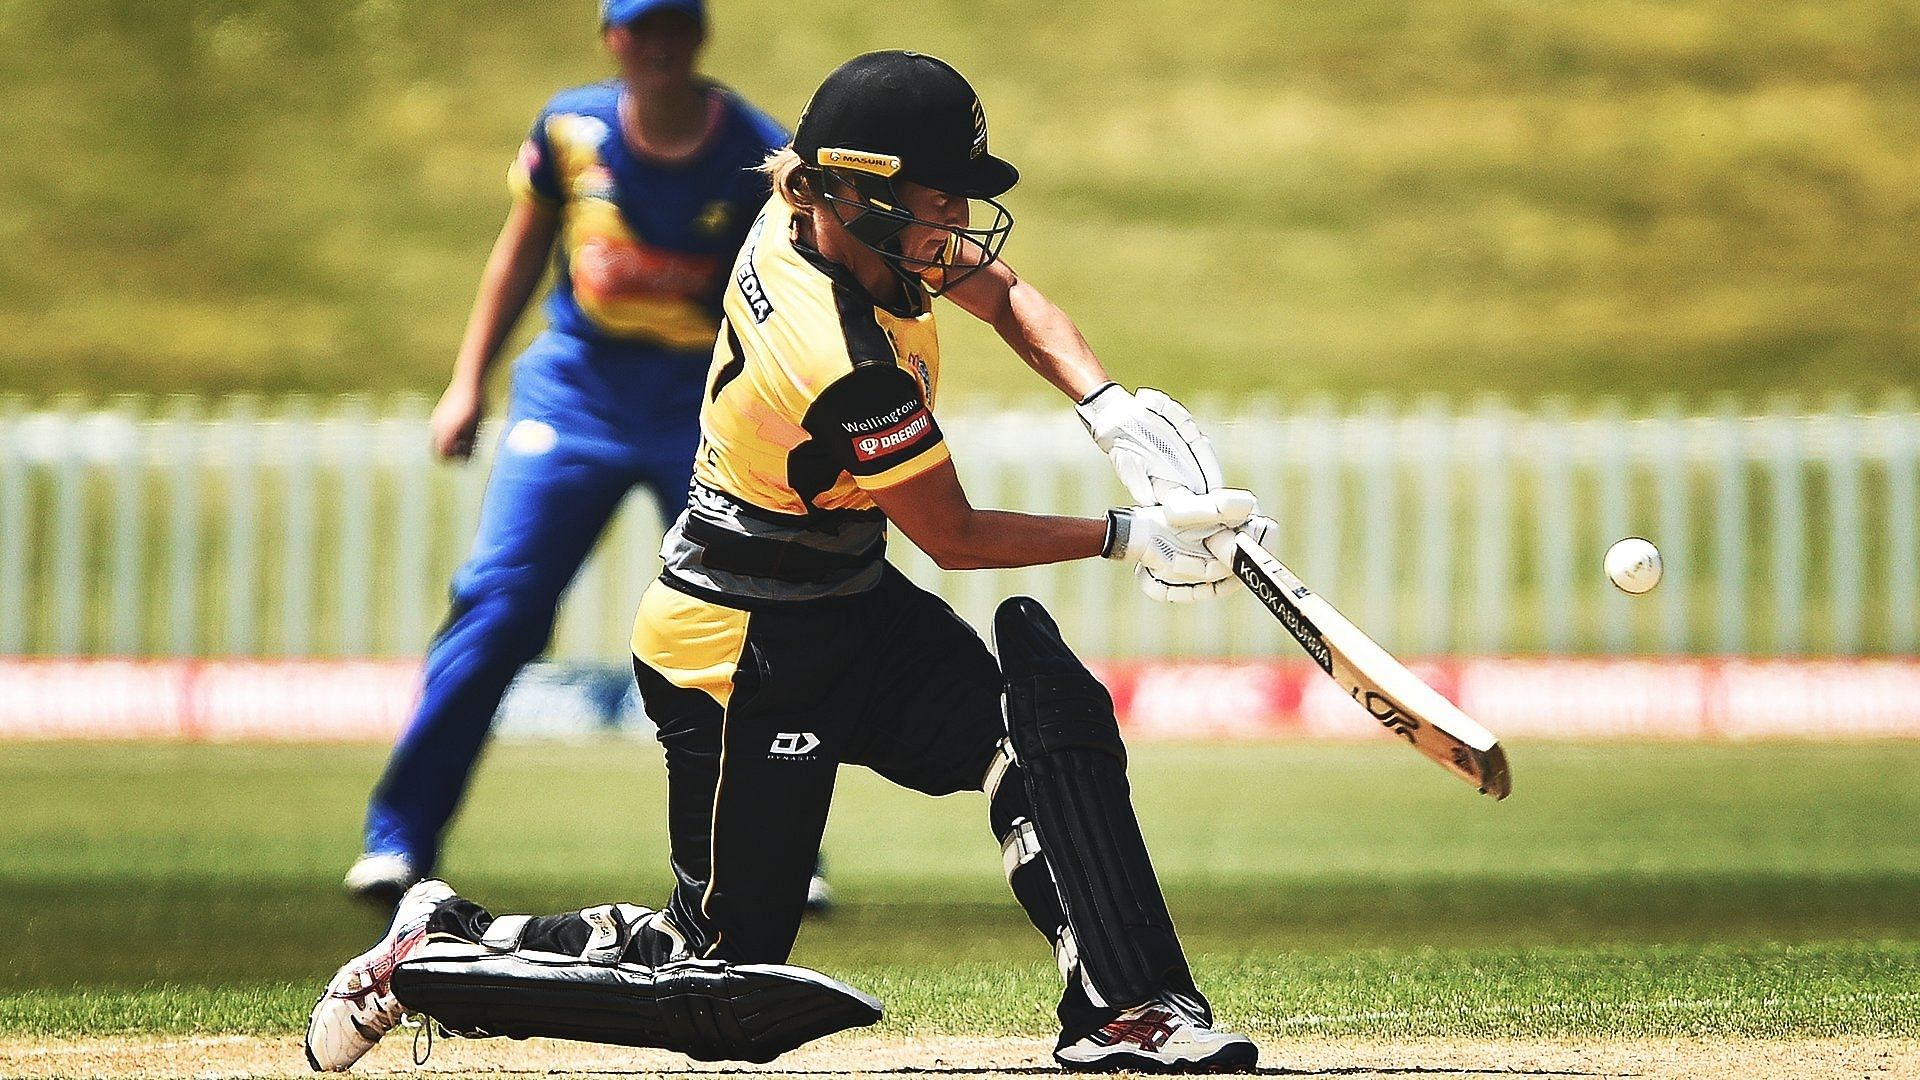 Sophie Devine scored the fastest hundred in the history of women’s T20 cricket, reaching three figures in just 36 balls.